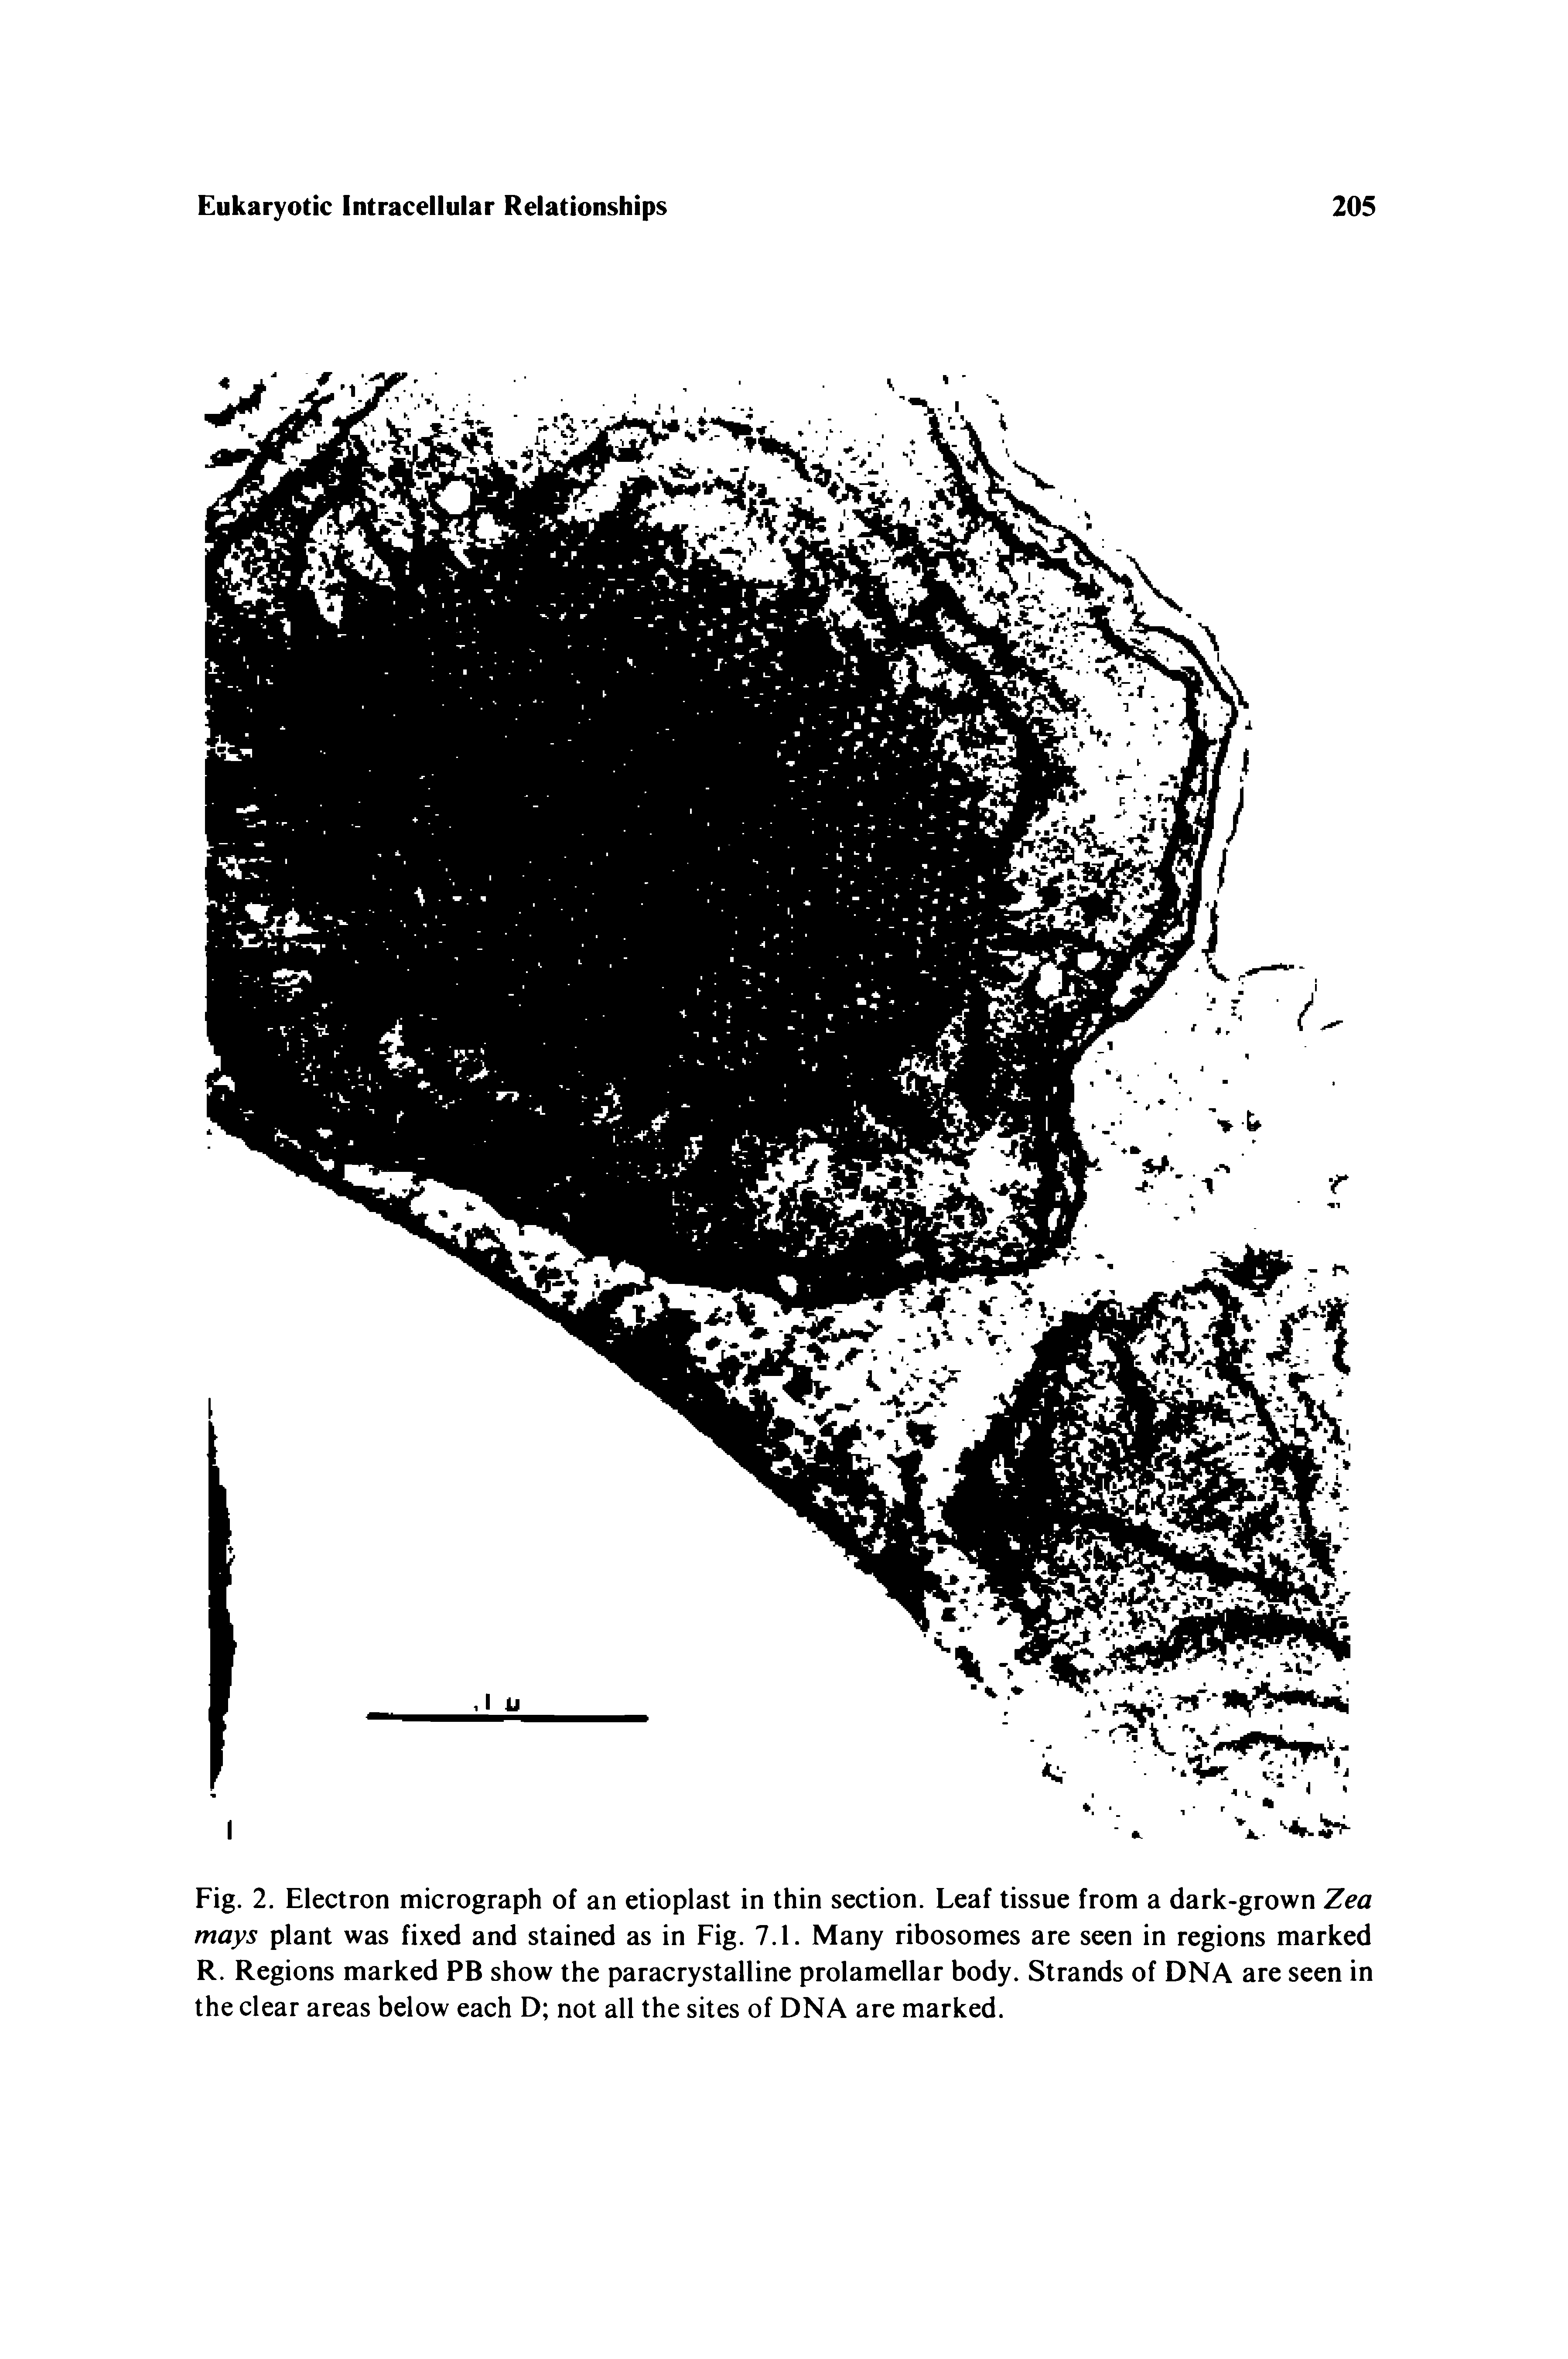 Fig. 2. Electron micrograph of an etioplast in thin section. Leaf tissue from a dark-grown Zea mays plant was fixed and stained as in Fig. 7.1. Many ribosomes are seen in regions marked R. Regions marked PB show the paracrystalline prolamellar body. Strands of DNA are seen in the clear areas below each D not all the sites of DNA are marked.